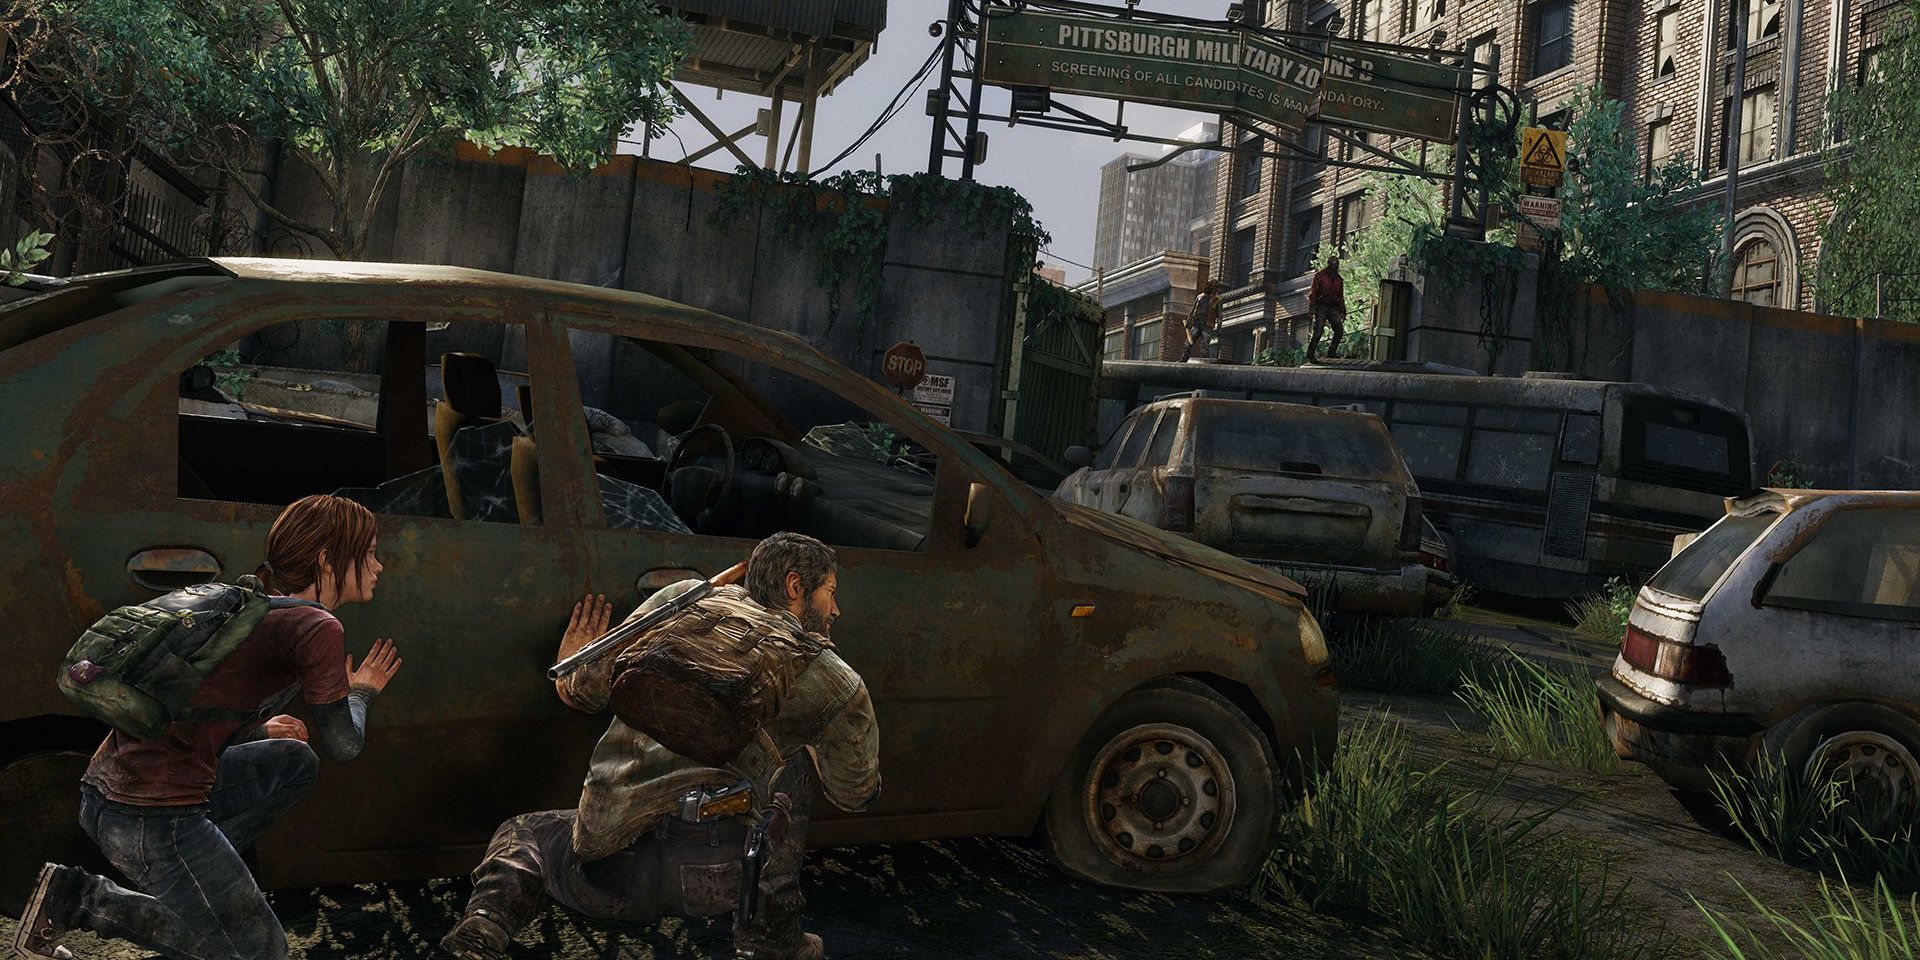 Ellie and Joel sneak alongside a vehicle while a guard is on lookout in The Last Of Us